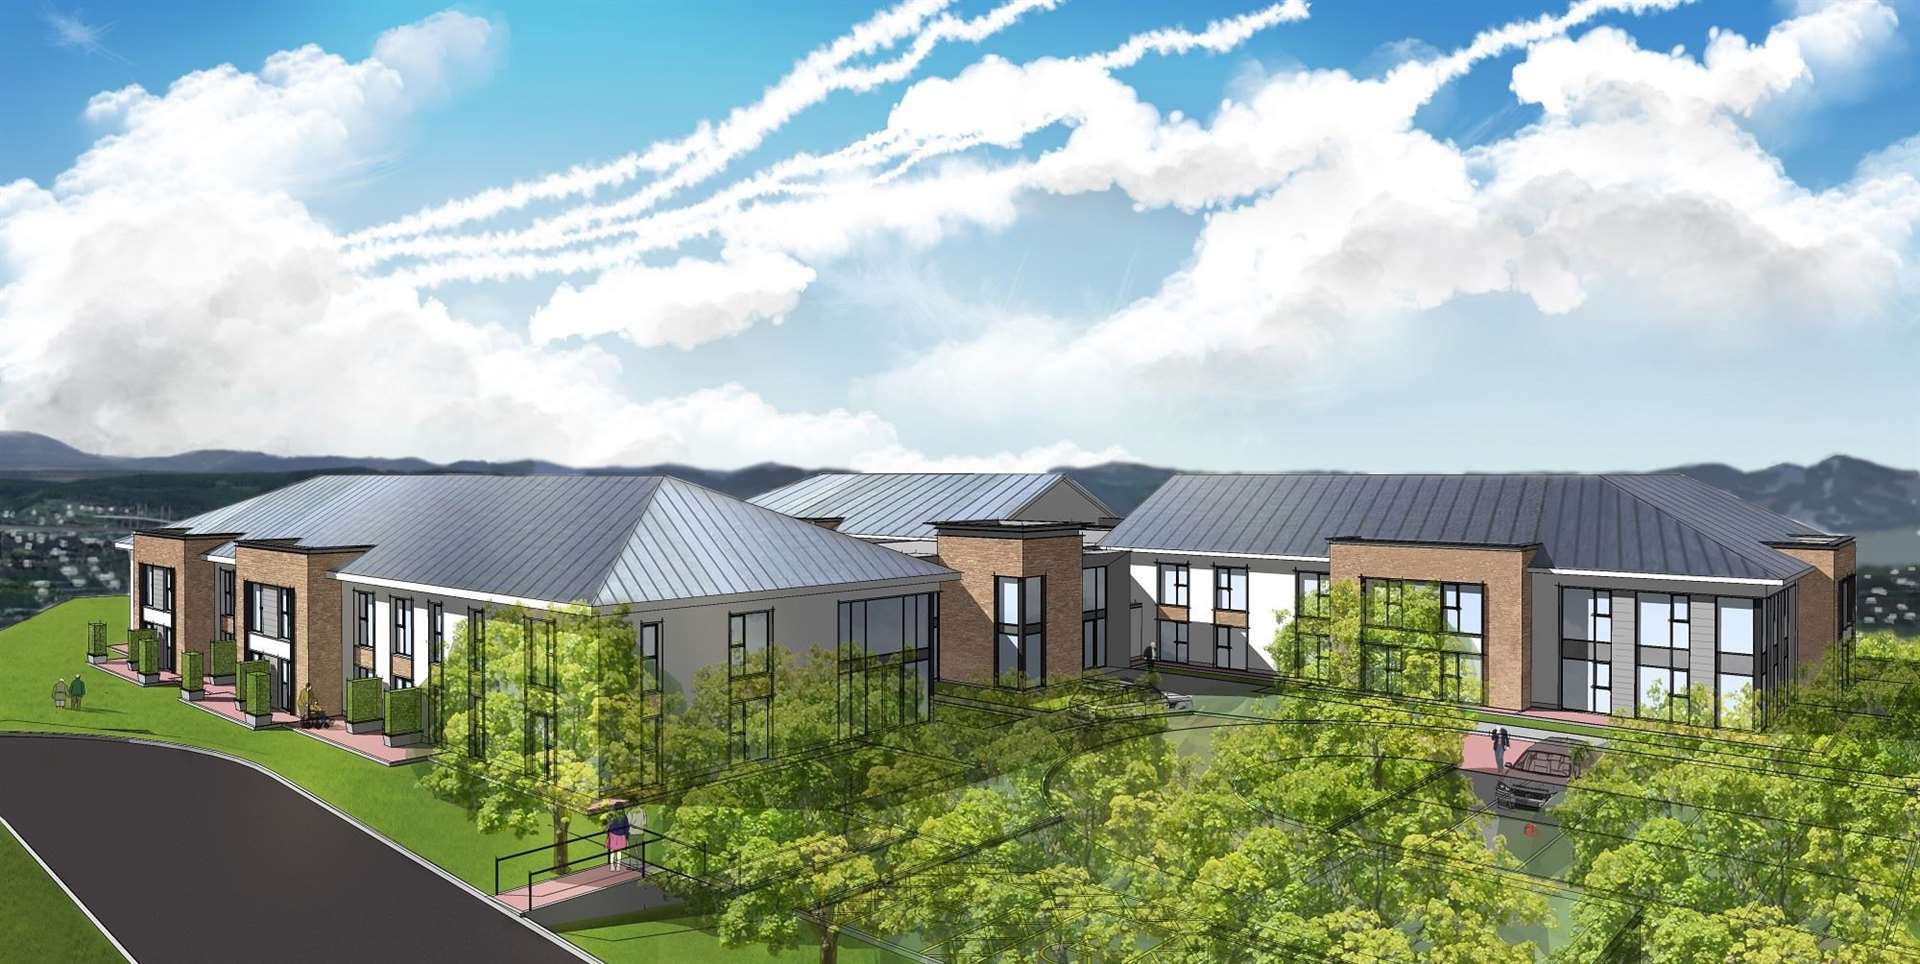 Parklands' new multi-million pound care home is planned for Milton of Leys in Inverness.